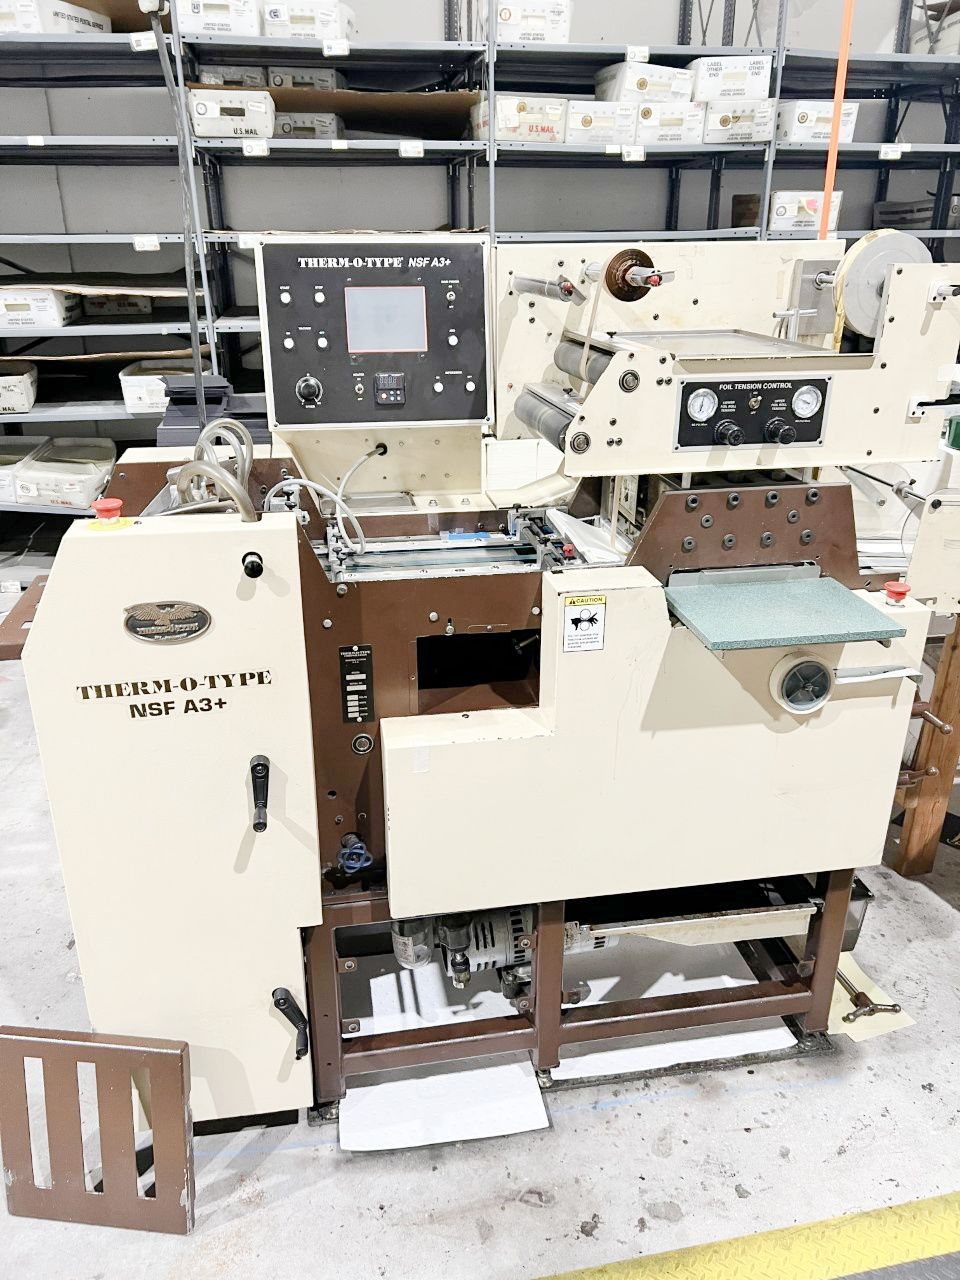 Equipment Lot: Thermotype & Thermography Machines (Used) Item # UE-080922B (Florida)